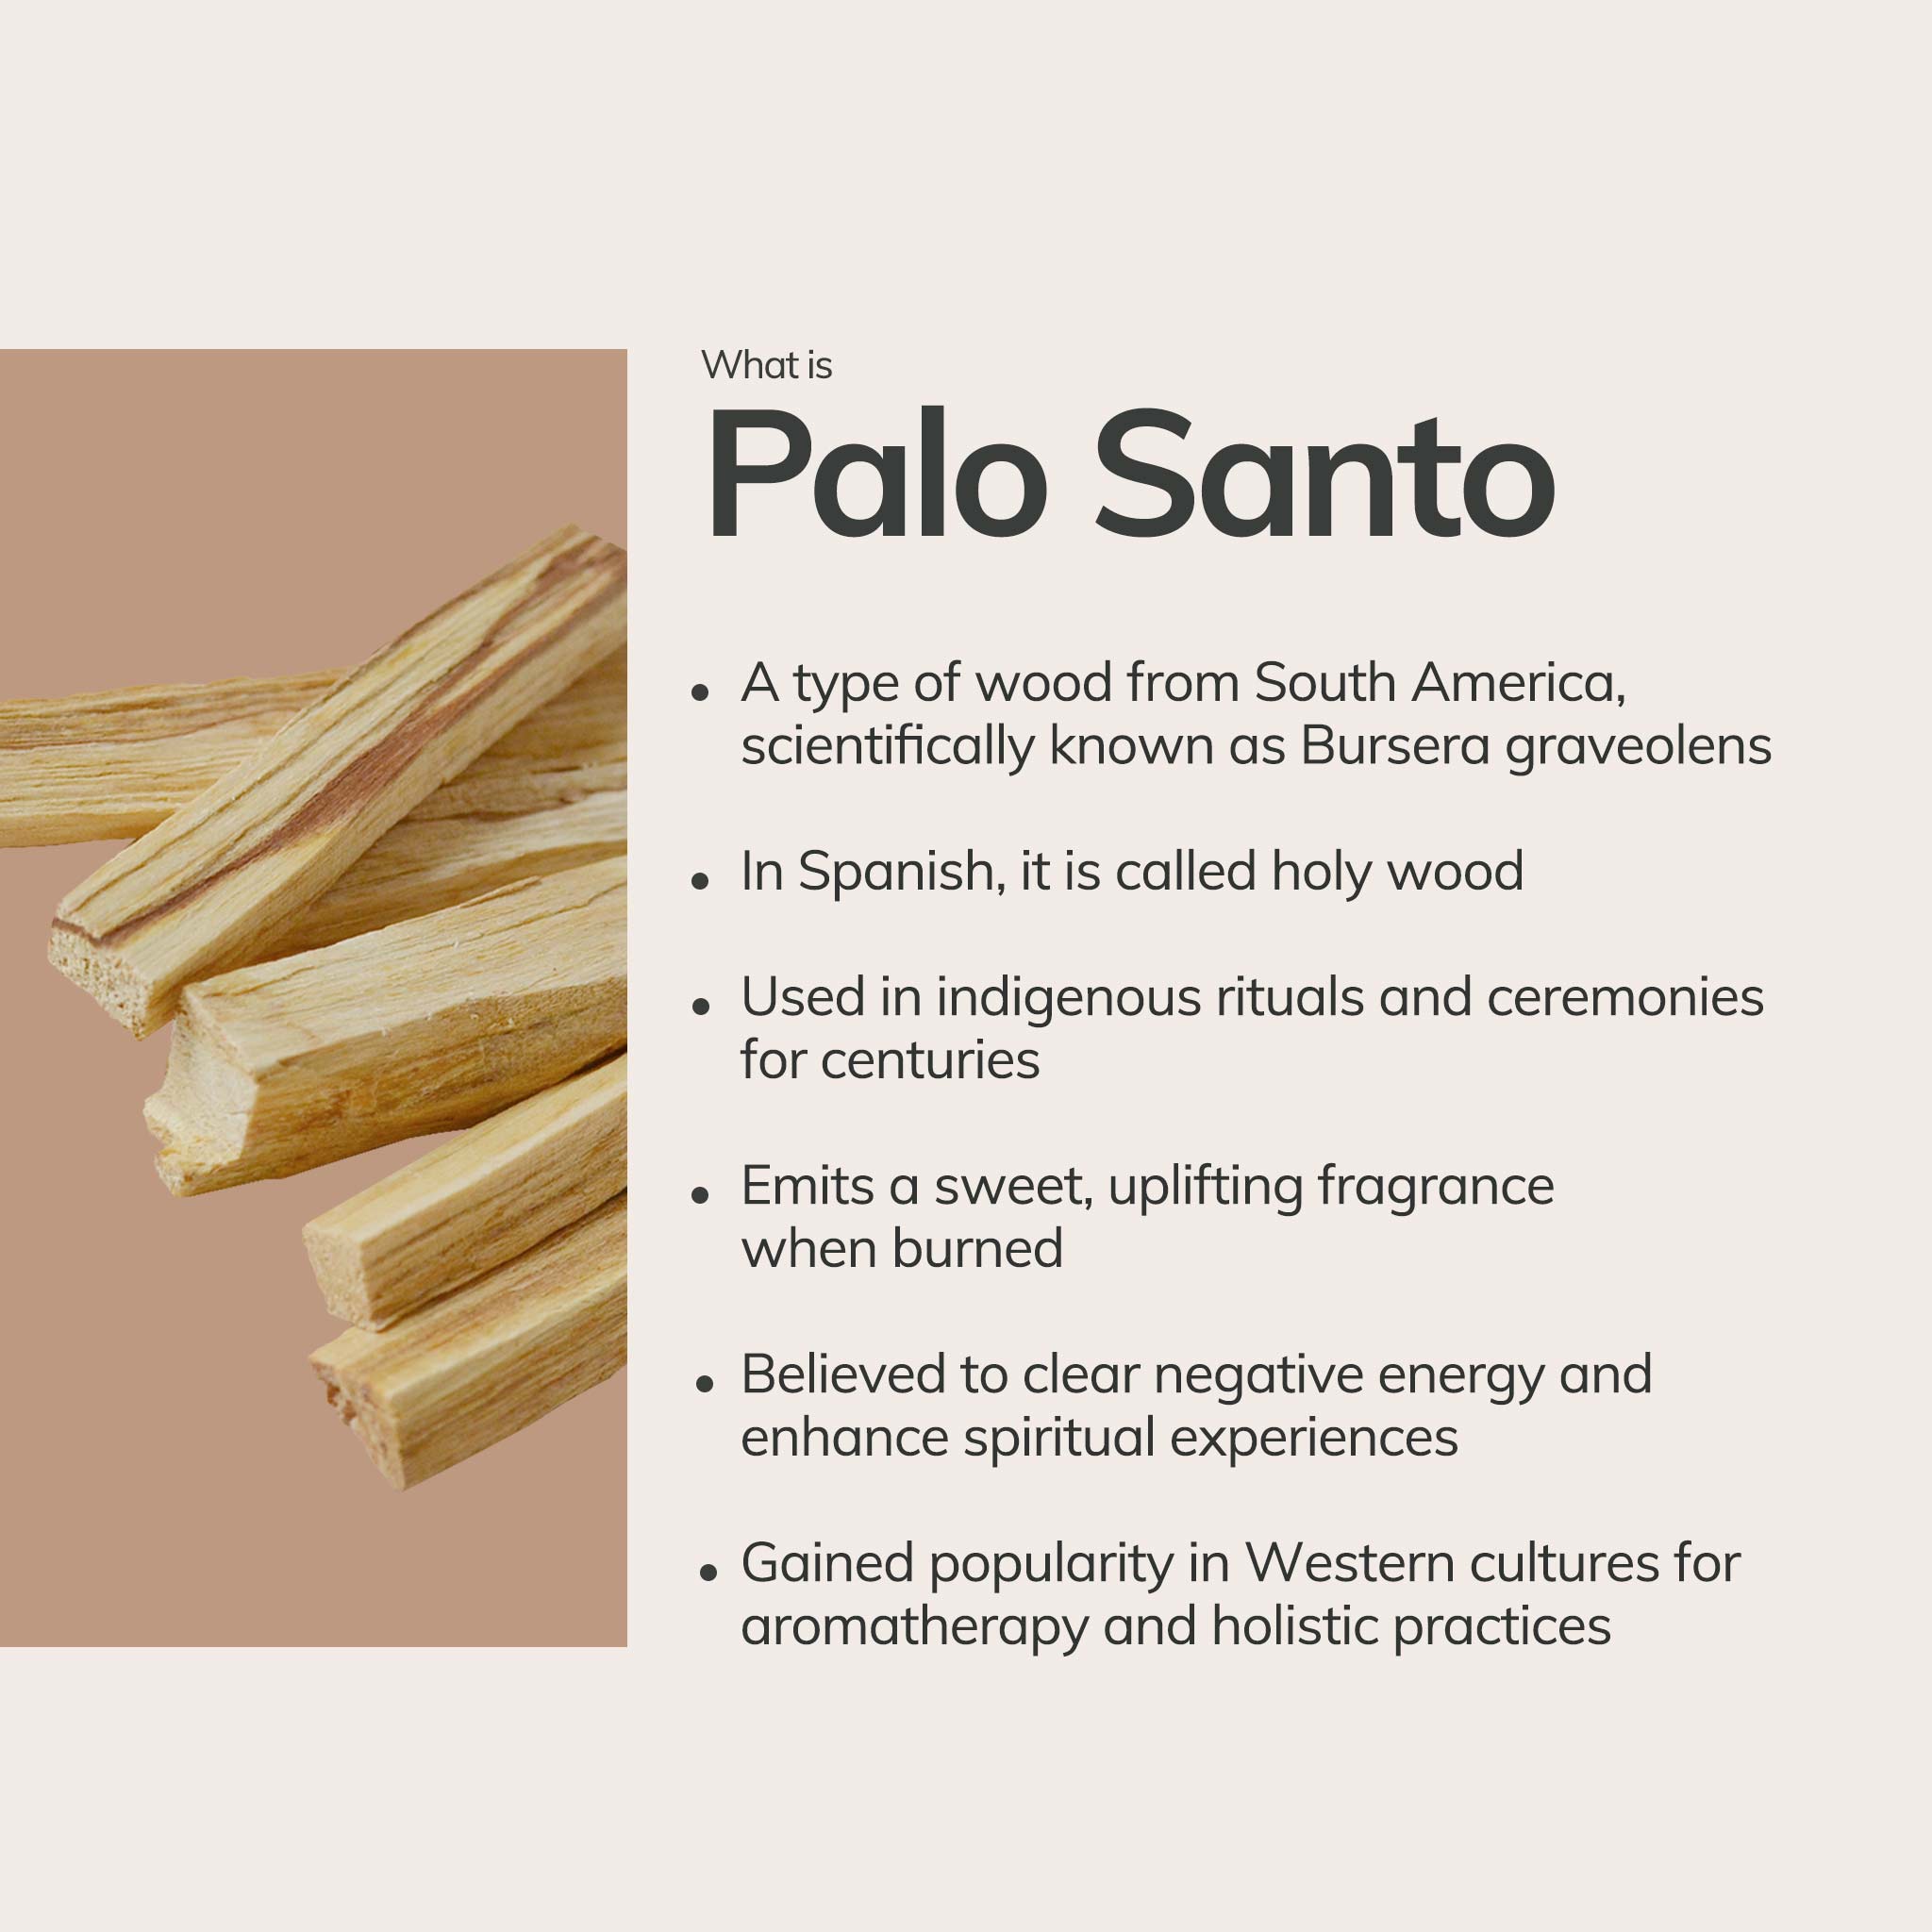 Left: palo santo wood sticks; Right: bullet list telling what is palo santo used for.